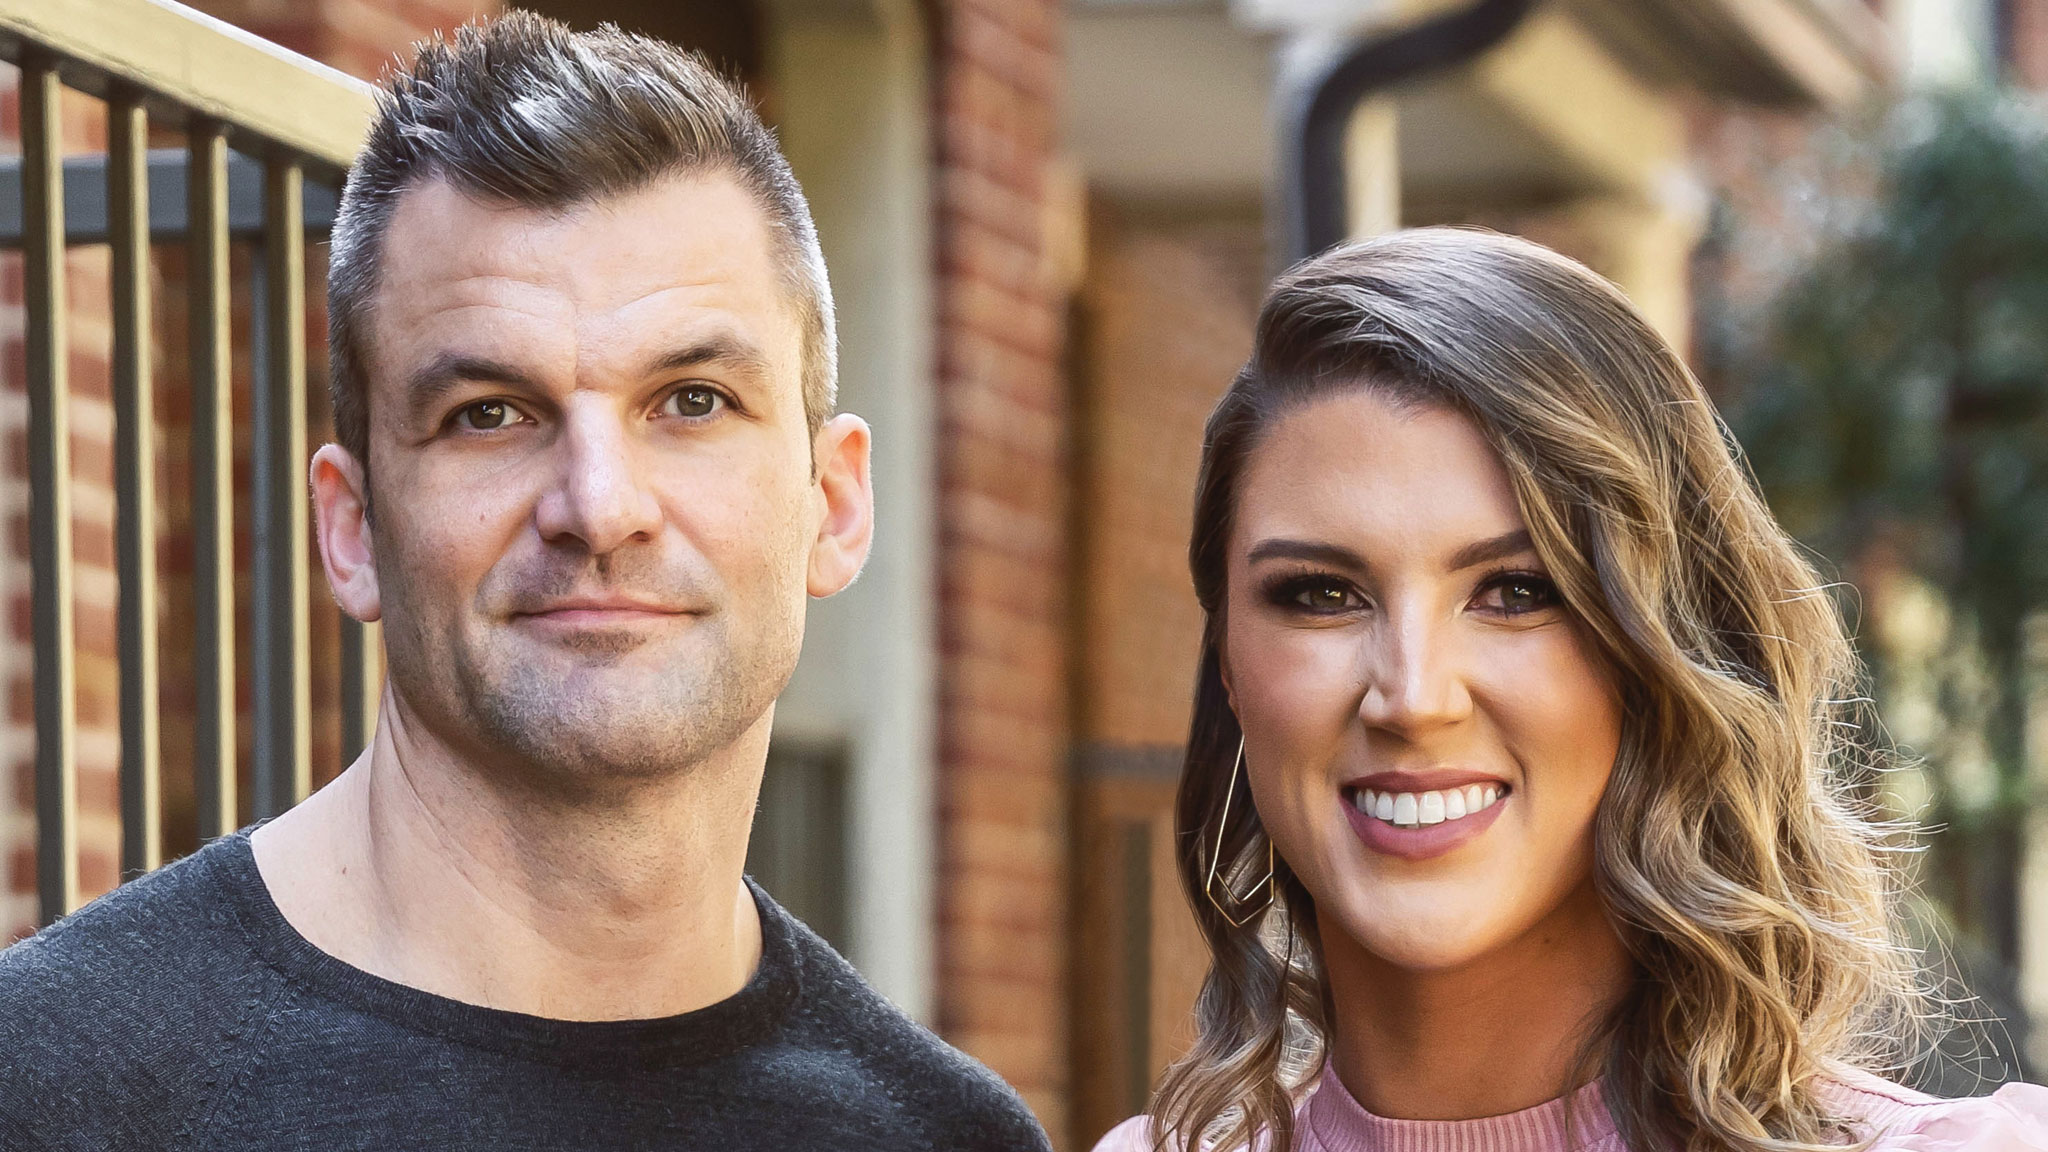 Haley And Jacob Married At First Sight Cast Lifetime 